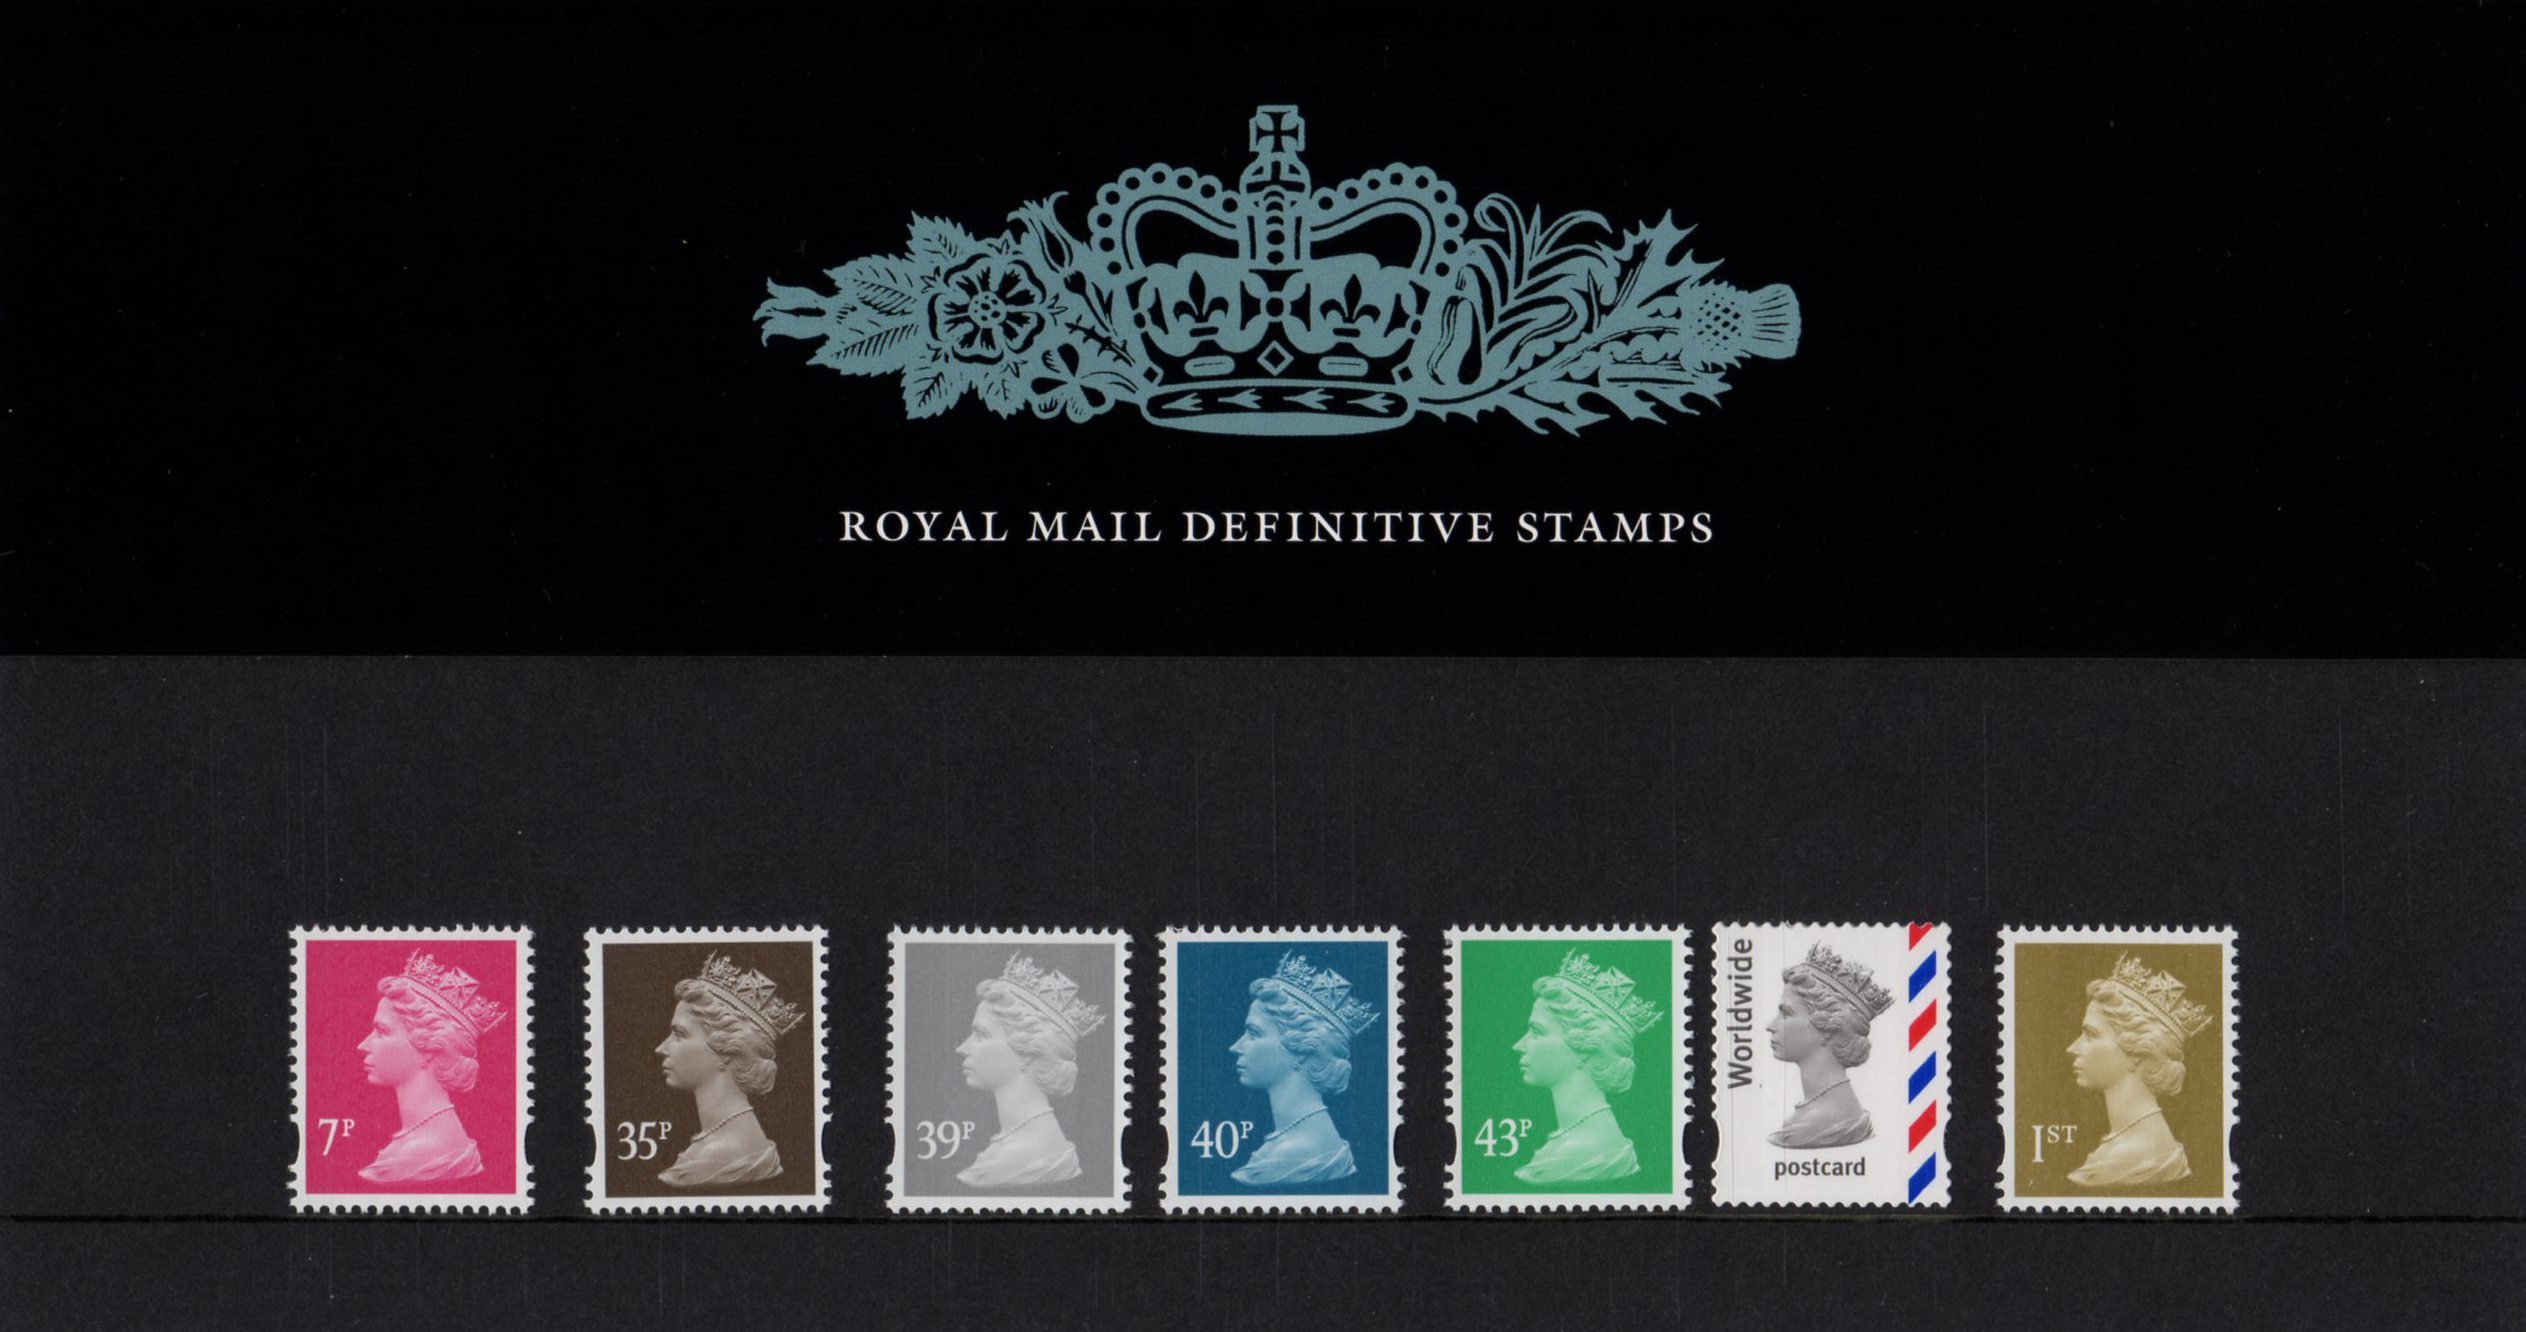 Gb collection. Stamp Definition. Municipal revenue stamps collection. The Royal collection of stamps. Royal stamps collection Red albums.